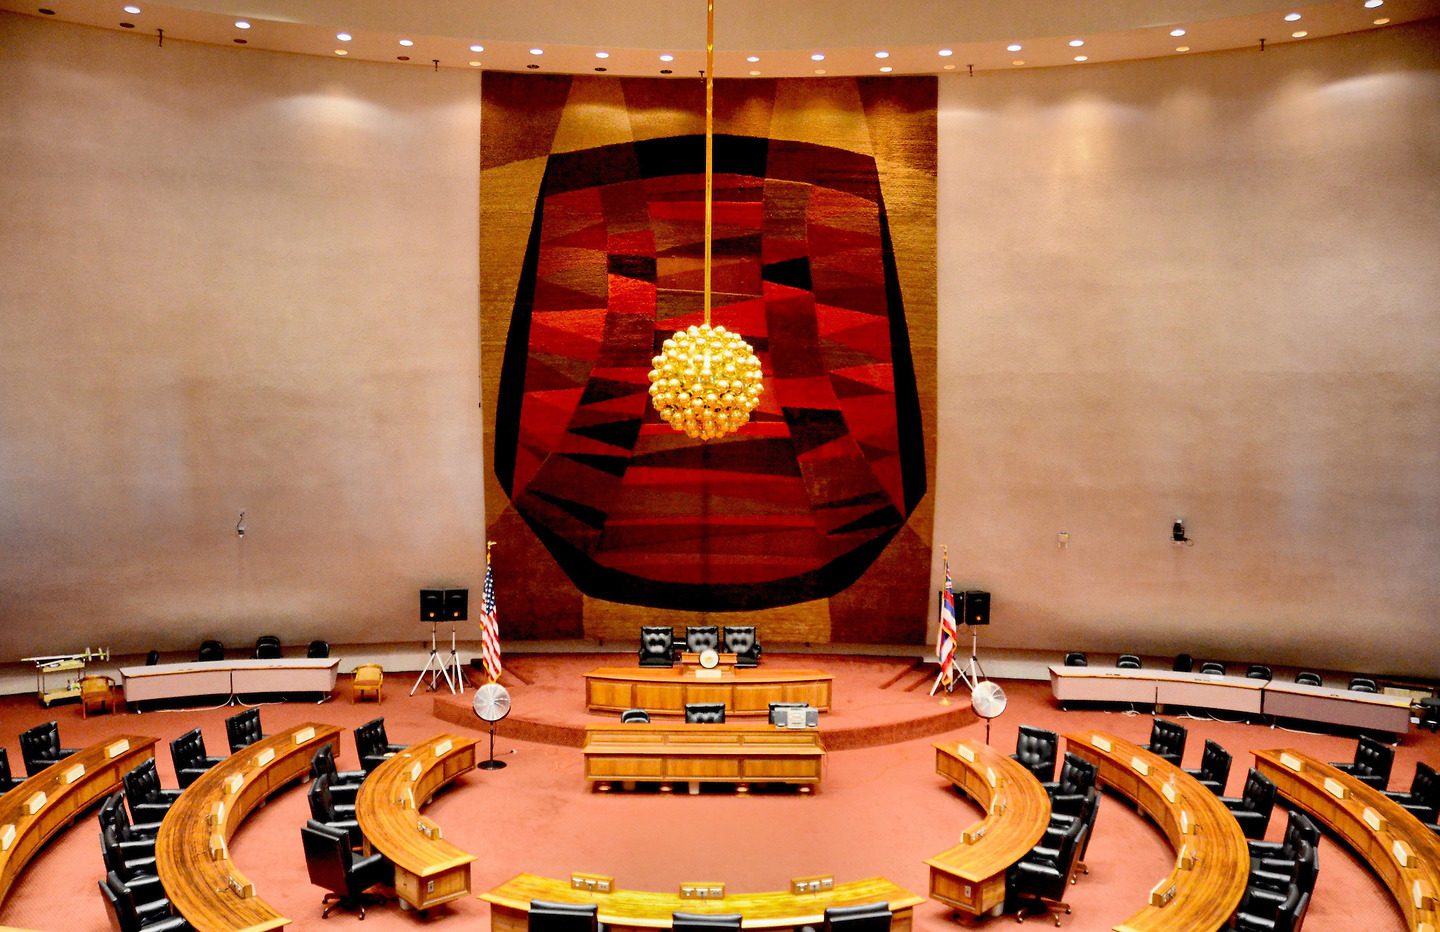 Image of the House of Representatives' chamber floor